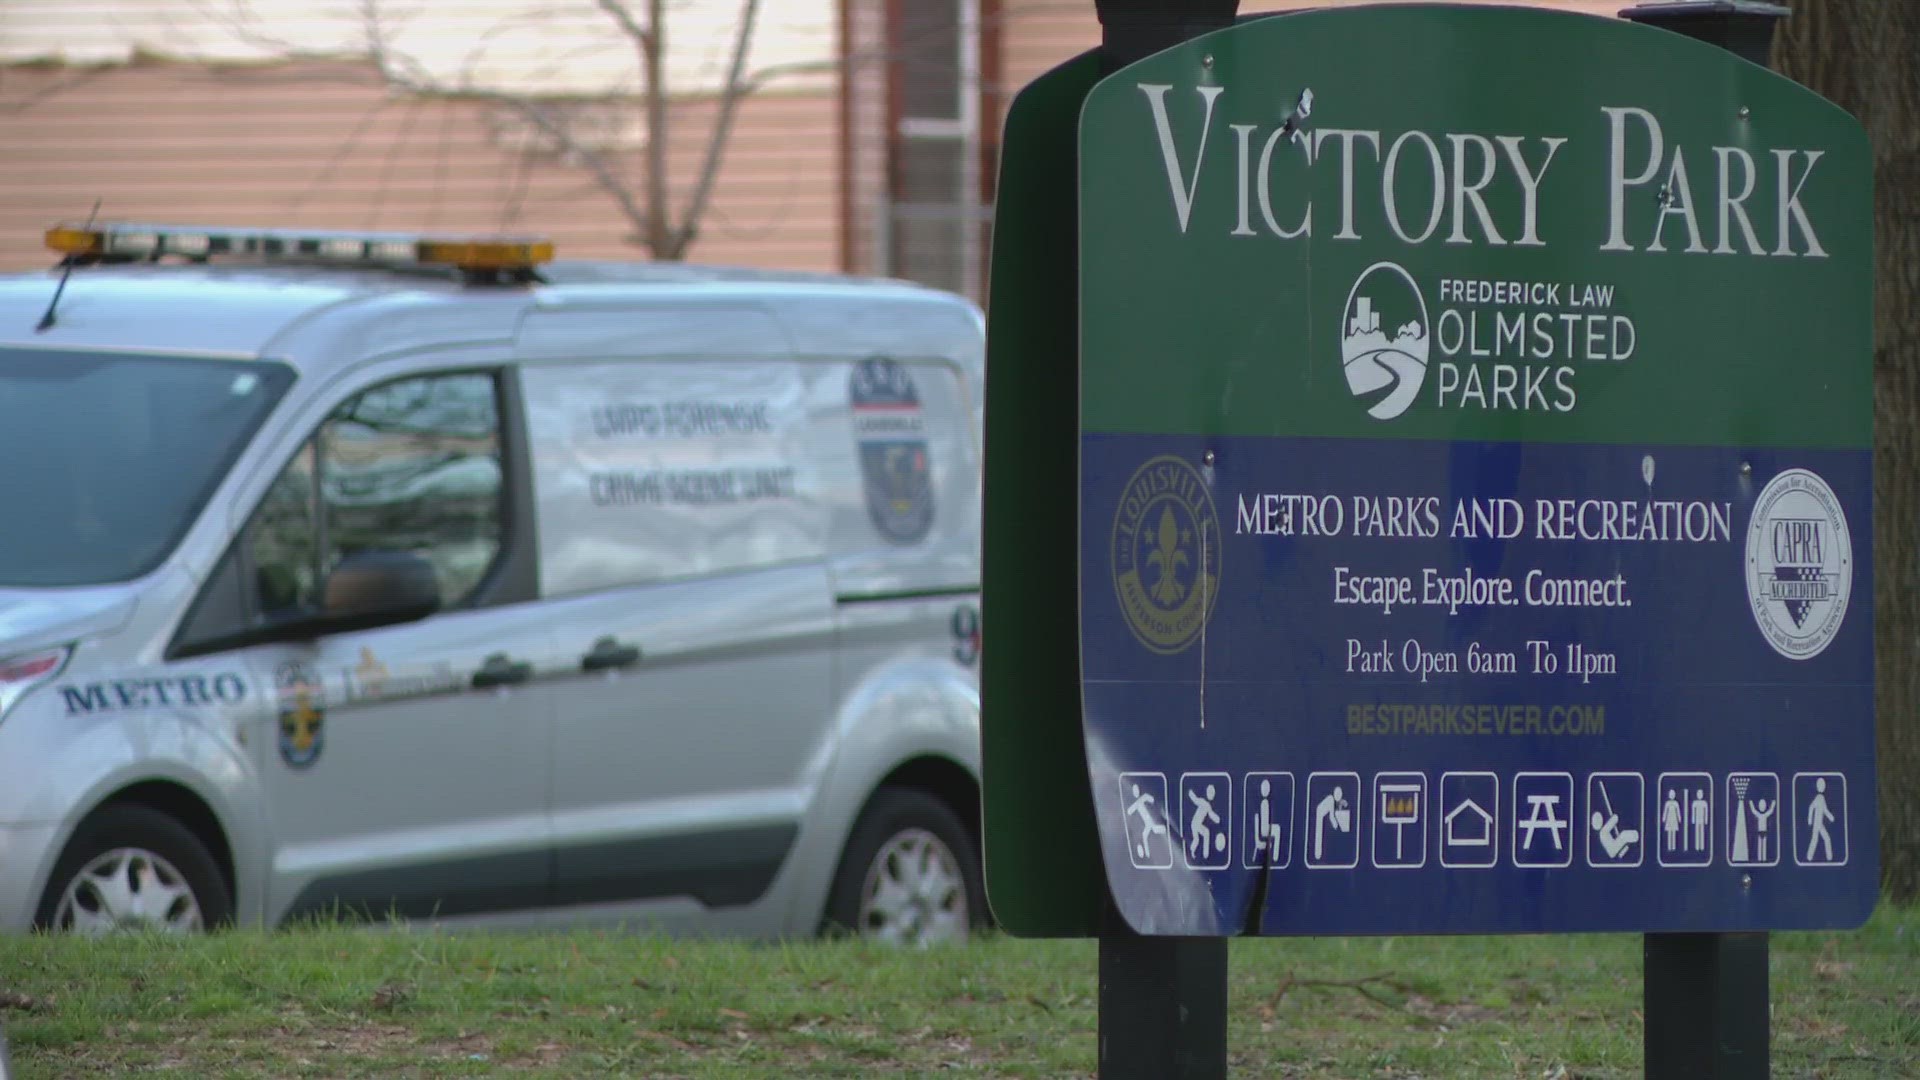 It was a violent start to spring break as a teen was one of four shot in separate incidents in Louisville. Victory Park neighbors said it could have been prevented.